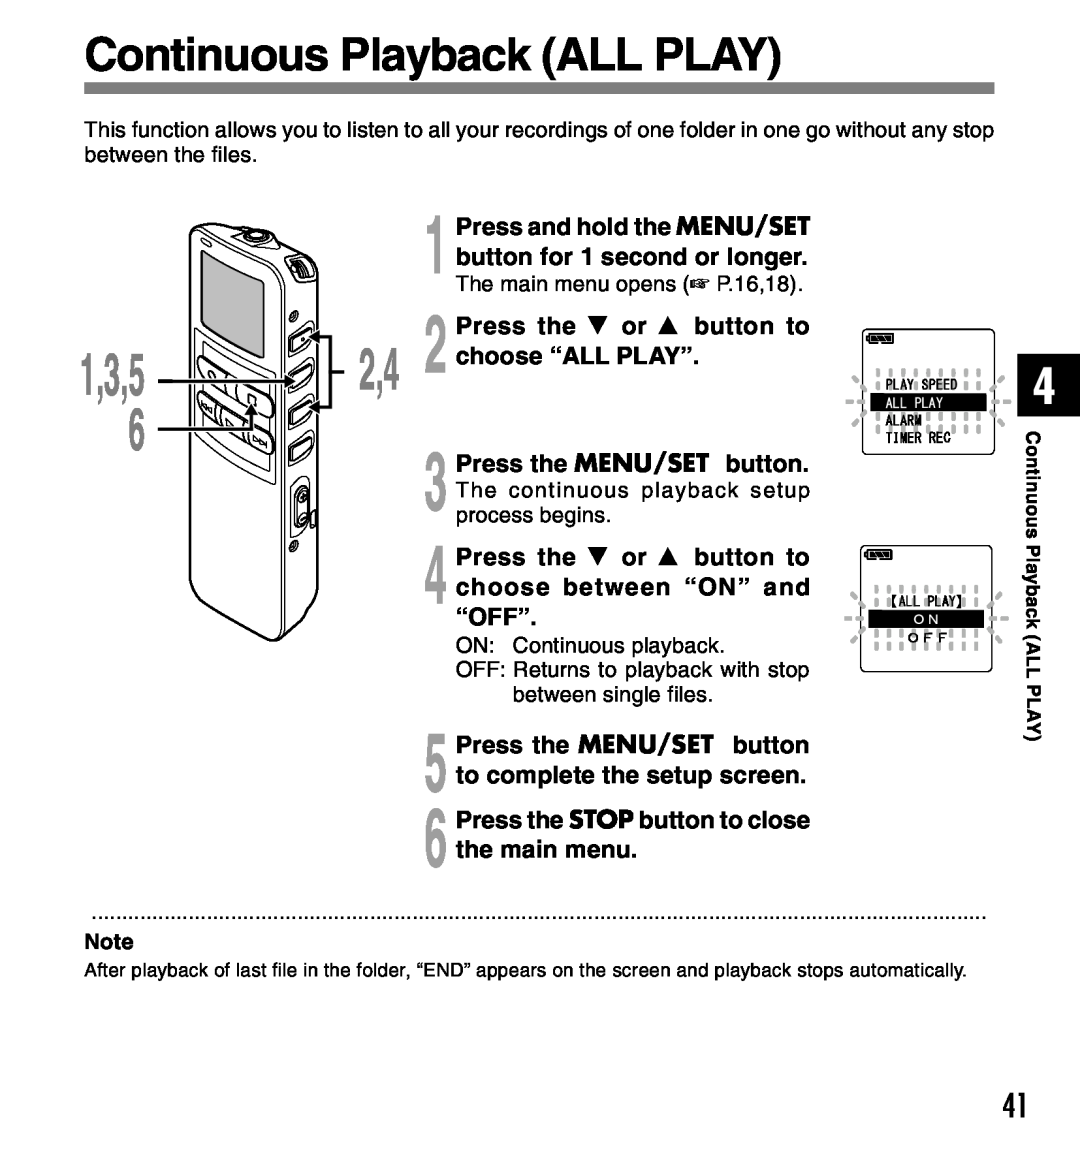 Olympus Continuous Playback ALL PLAY, 2,4 2 choose “ALL PLAY”, Press the 3 or 2 button to choose between “ON” and “OFF” 